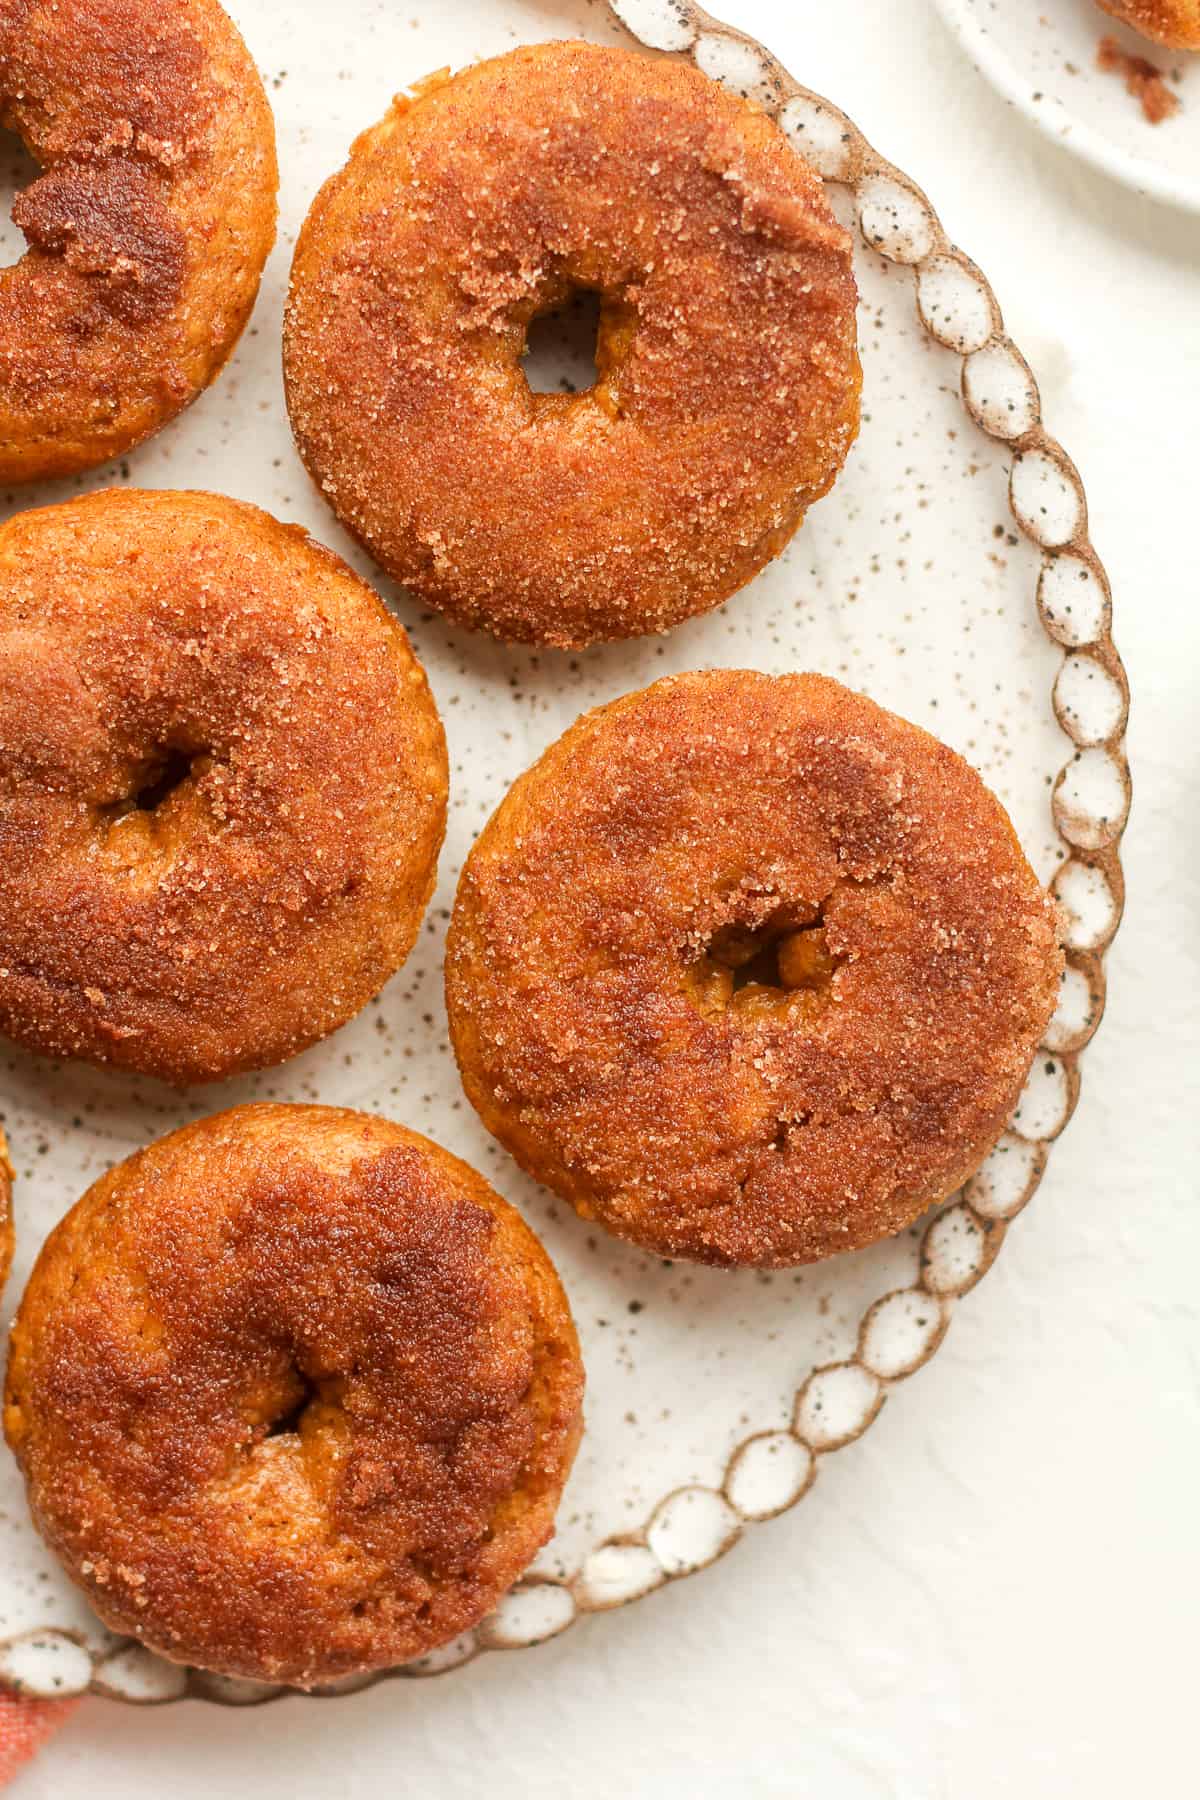 A plate with several pumpkin donuts.